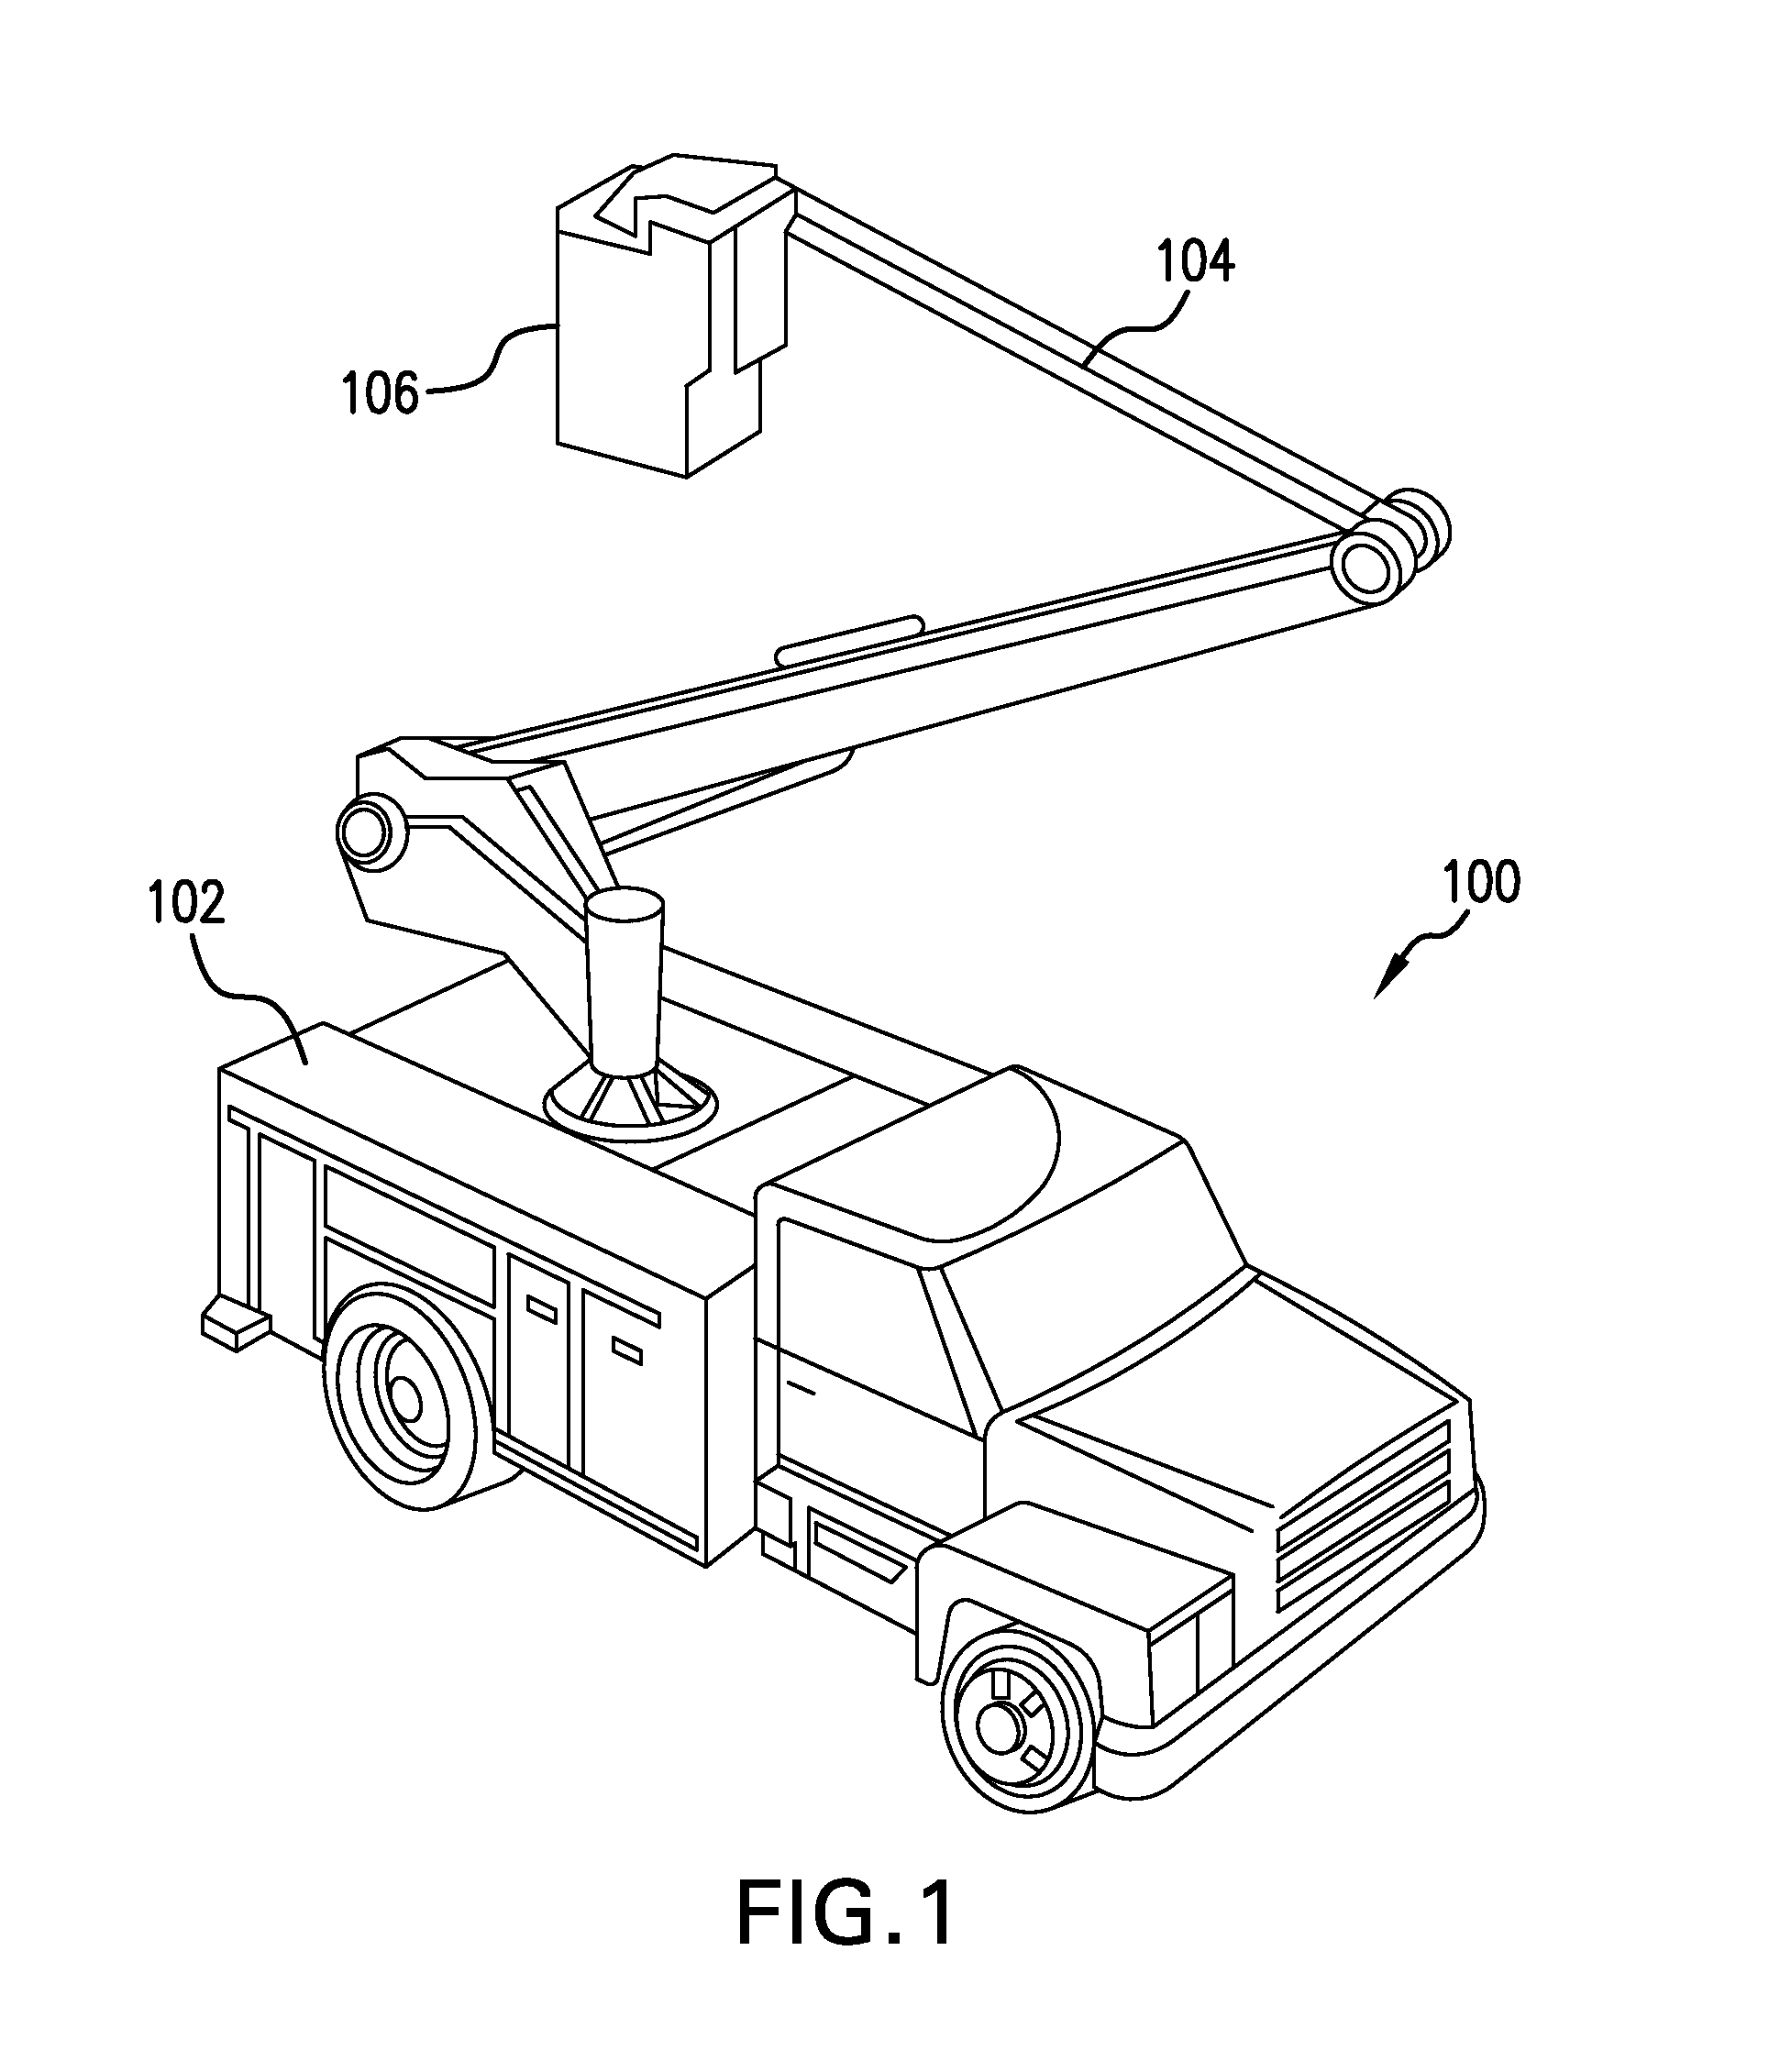 Slide bar anchorage device for aerial lift equipment